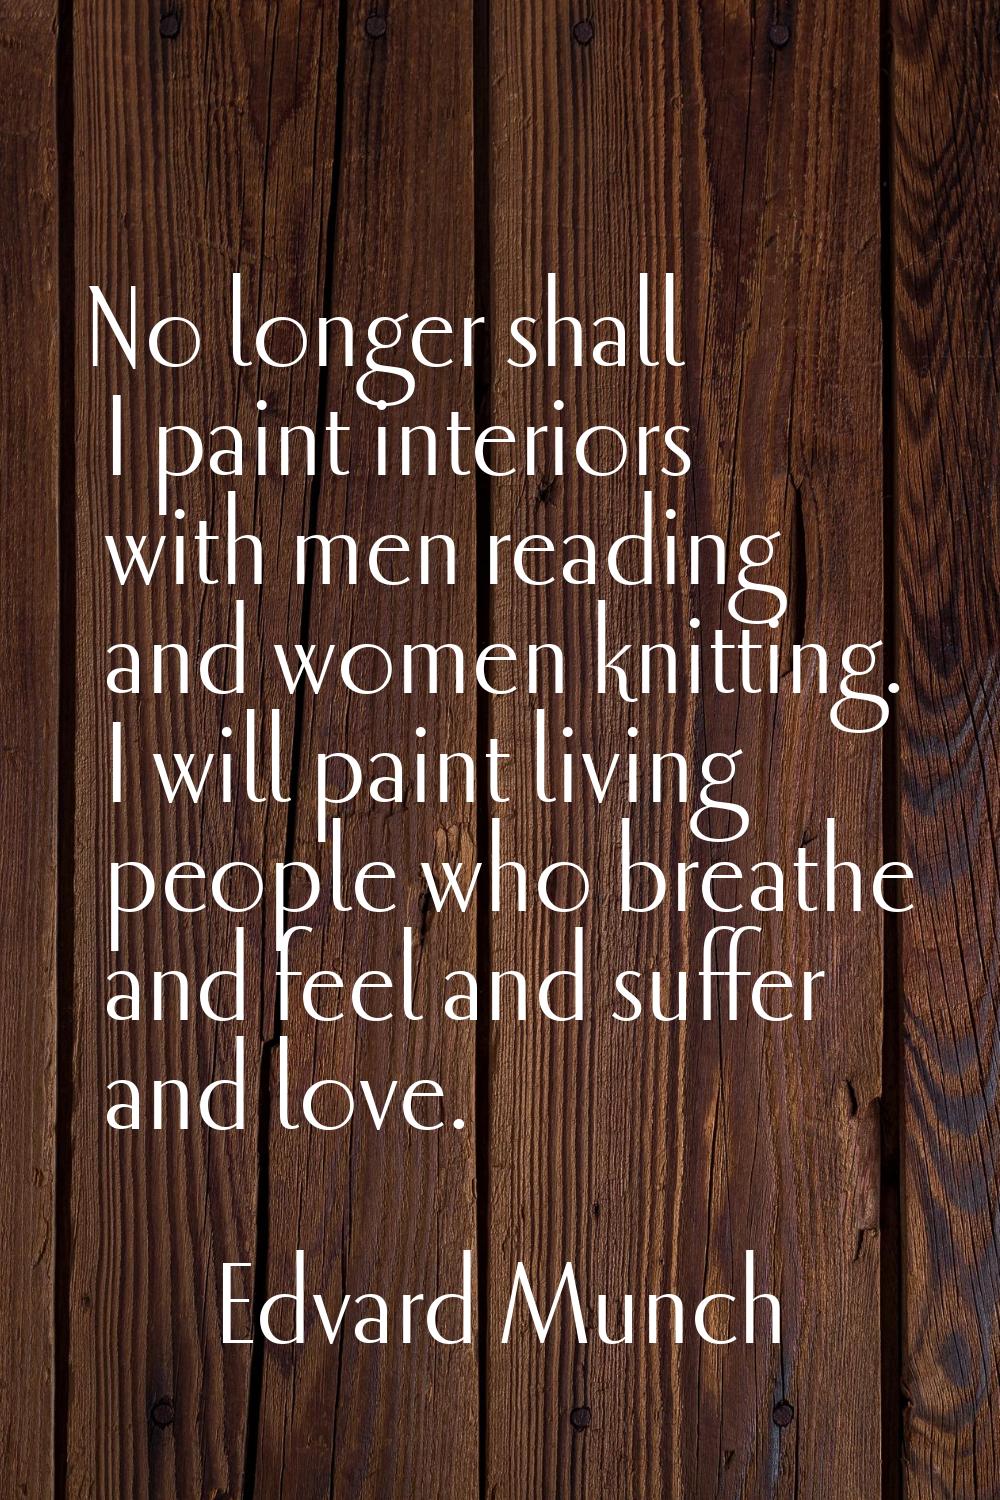 No longer shall I paint interiors with men reading and women knitting. I will paint living people w